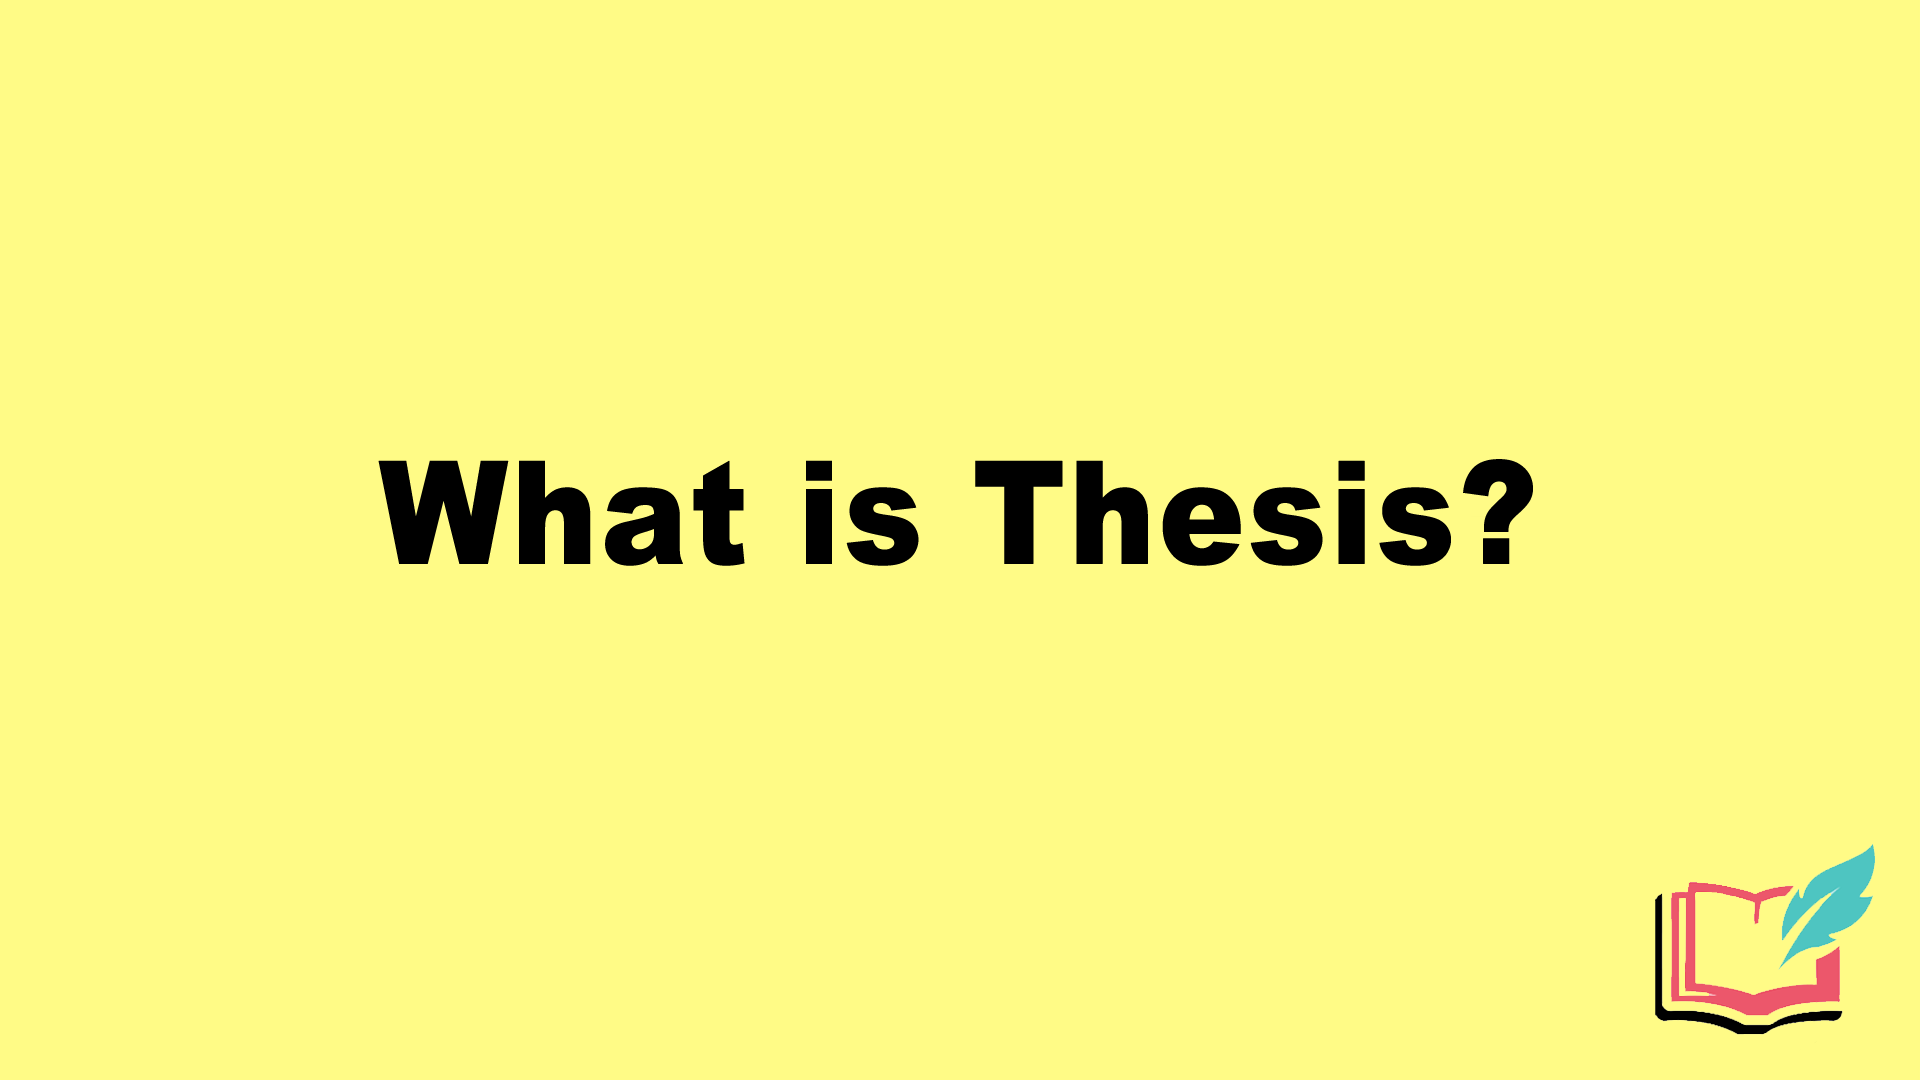 thesis definition